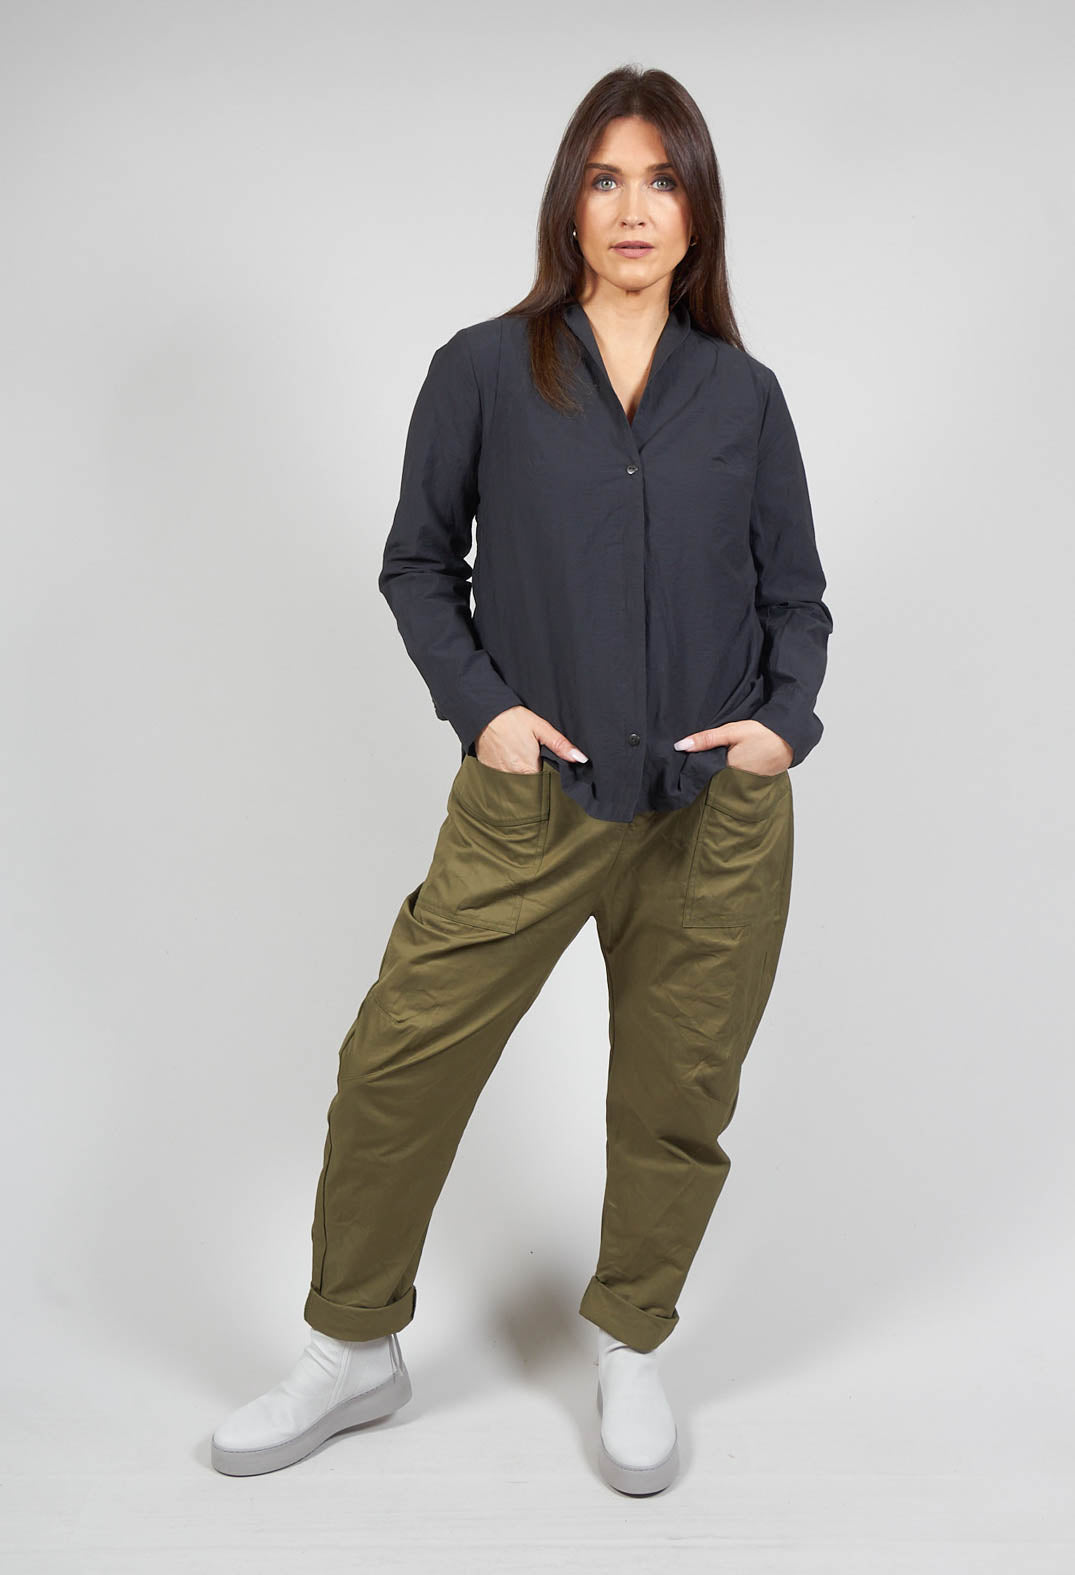 Jacy Shirt with Overlay Detail in Ardoise